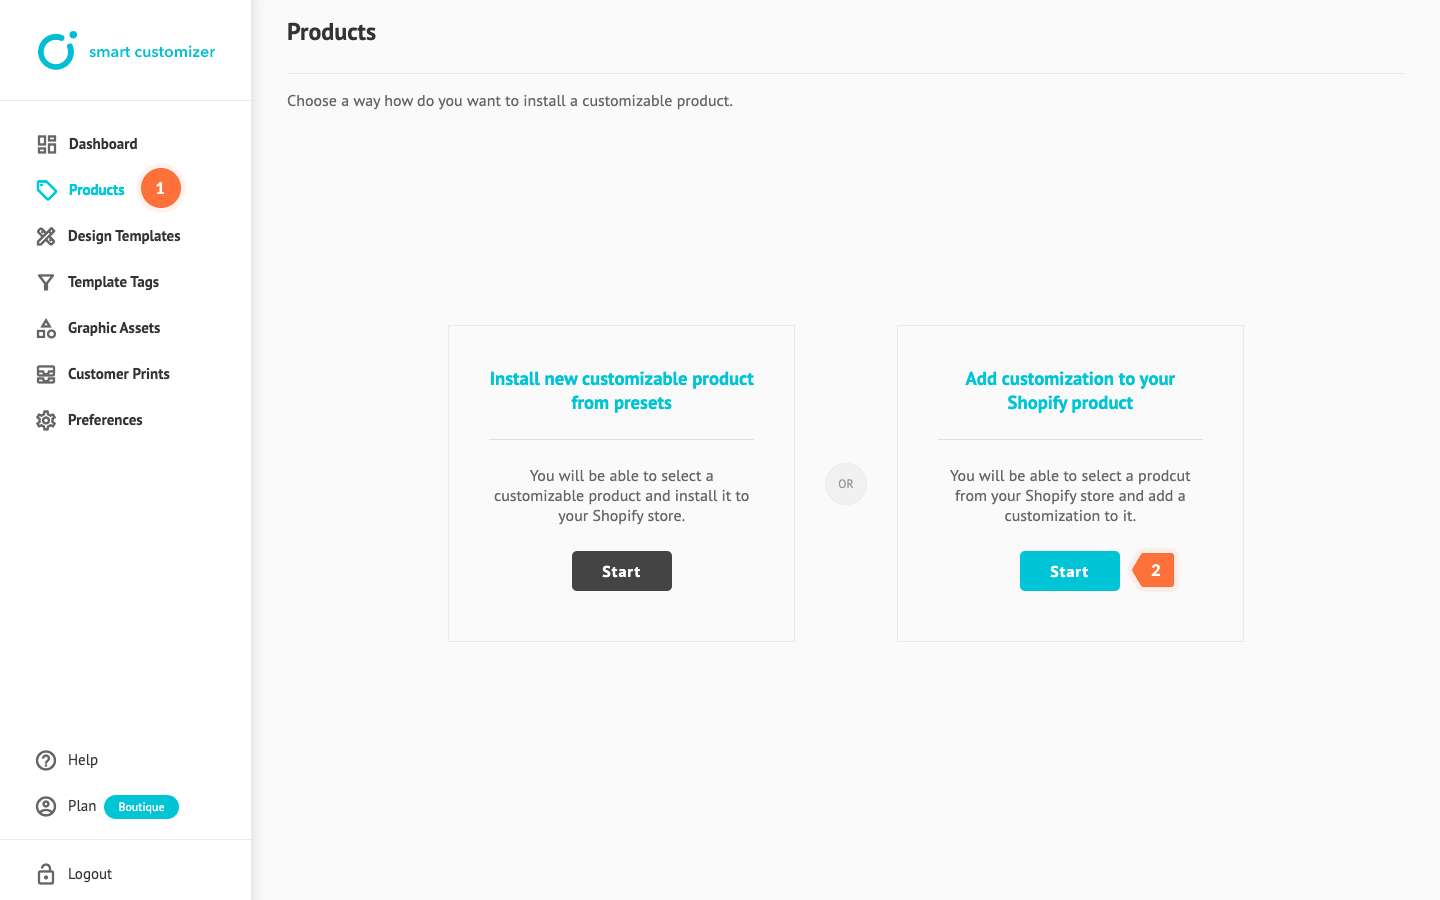 how to add customization to your Shopify products